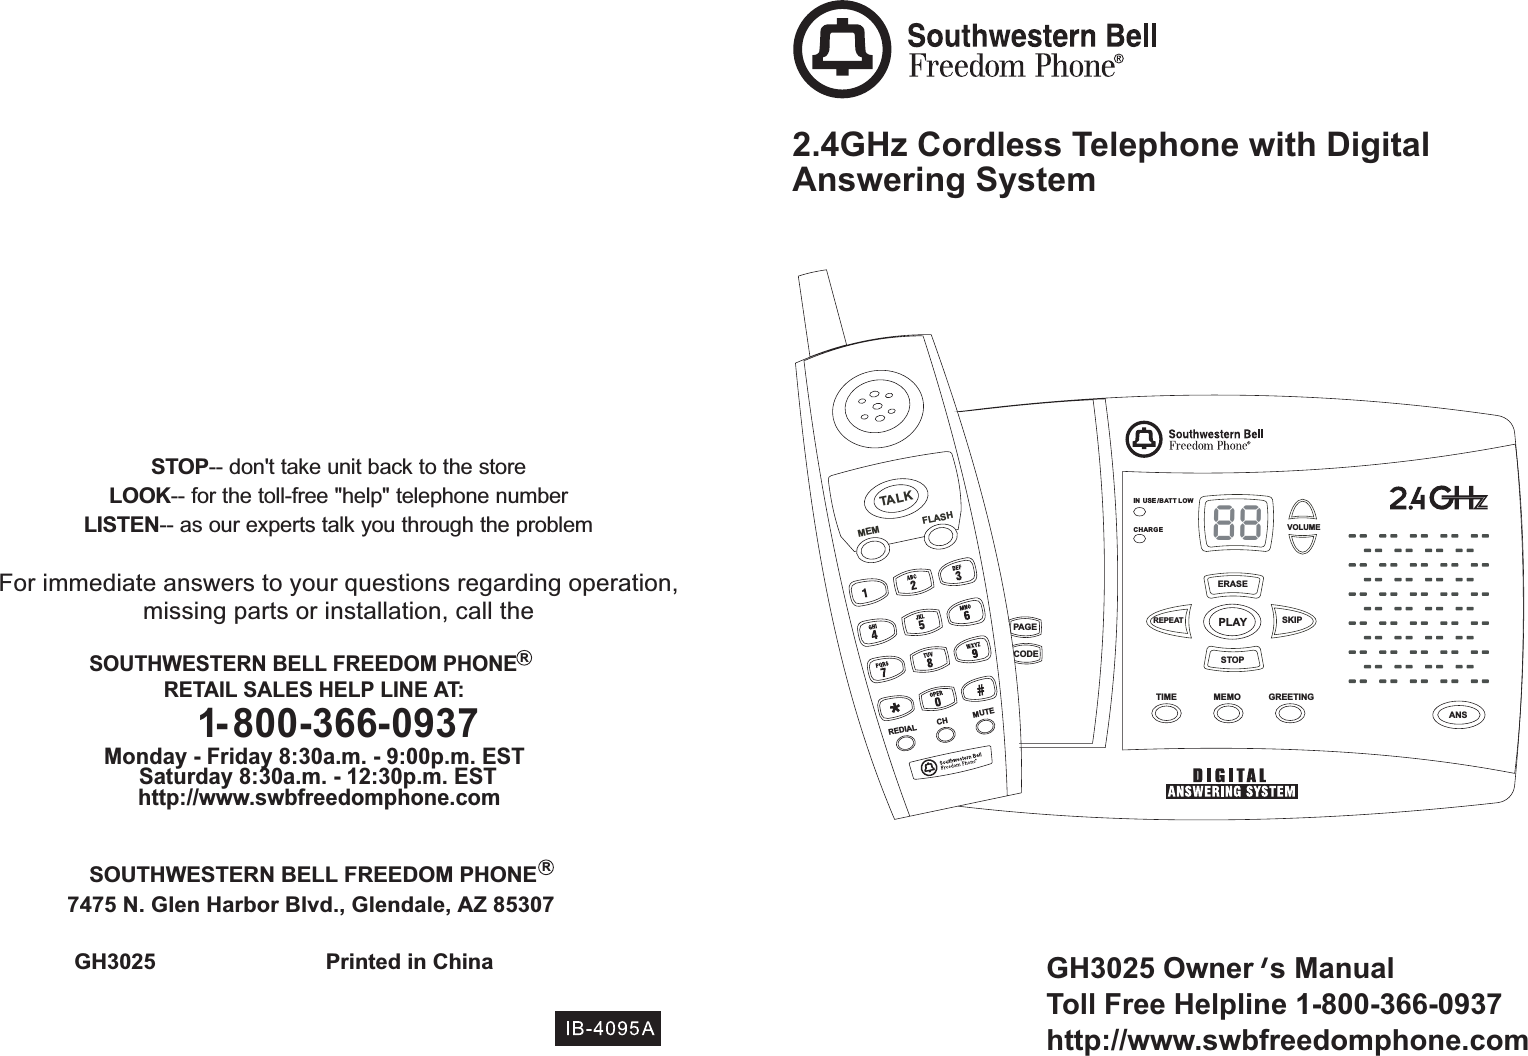 GH3025 Owner s ManualToll Free Helpline 1-800-366-0937http://www.swbfreedomphone.com2.4GHz Cordless Telephone with DigitalAnswering System¯GH3025 Printed in ChinaSOUTHWESTERN BELL FREEDOM PHONE7475 N. Glen Harbor Blvd., Glendale, AZ 85307STOP-- don&apos;t take unit back to the storeLOOK-- for the toll-free &quot;help&quot; telephone numberLISTEN-- as our experts talk you through the problemFor immediate answers to your questions regarding operation,missing parts or installation, call theSOUTHWESTERN BELL FREEDOM PHONERETAIL SALES HELP LINE AT:1-800-366-0937Monday - Friday 8:30a.m. - 9:00p.m. ESTSaturday 8:30a.m. - 12:30p.m. ESThttp://www.swbfreedomphone.comRR88VOLUMEERASESTOPSKIPREPEAT PLAYTIME MEMO GREETINGCODEPAGEANSMEMTA LKFLASHREDIAL CH MUTECHARGEIN USE /BATT LOW,